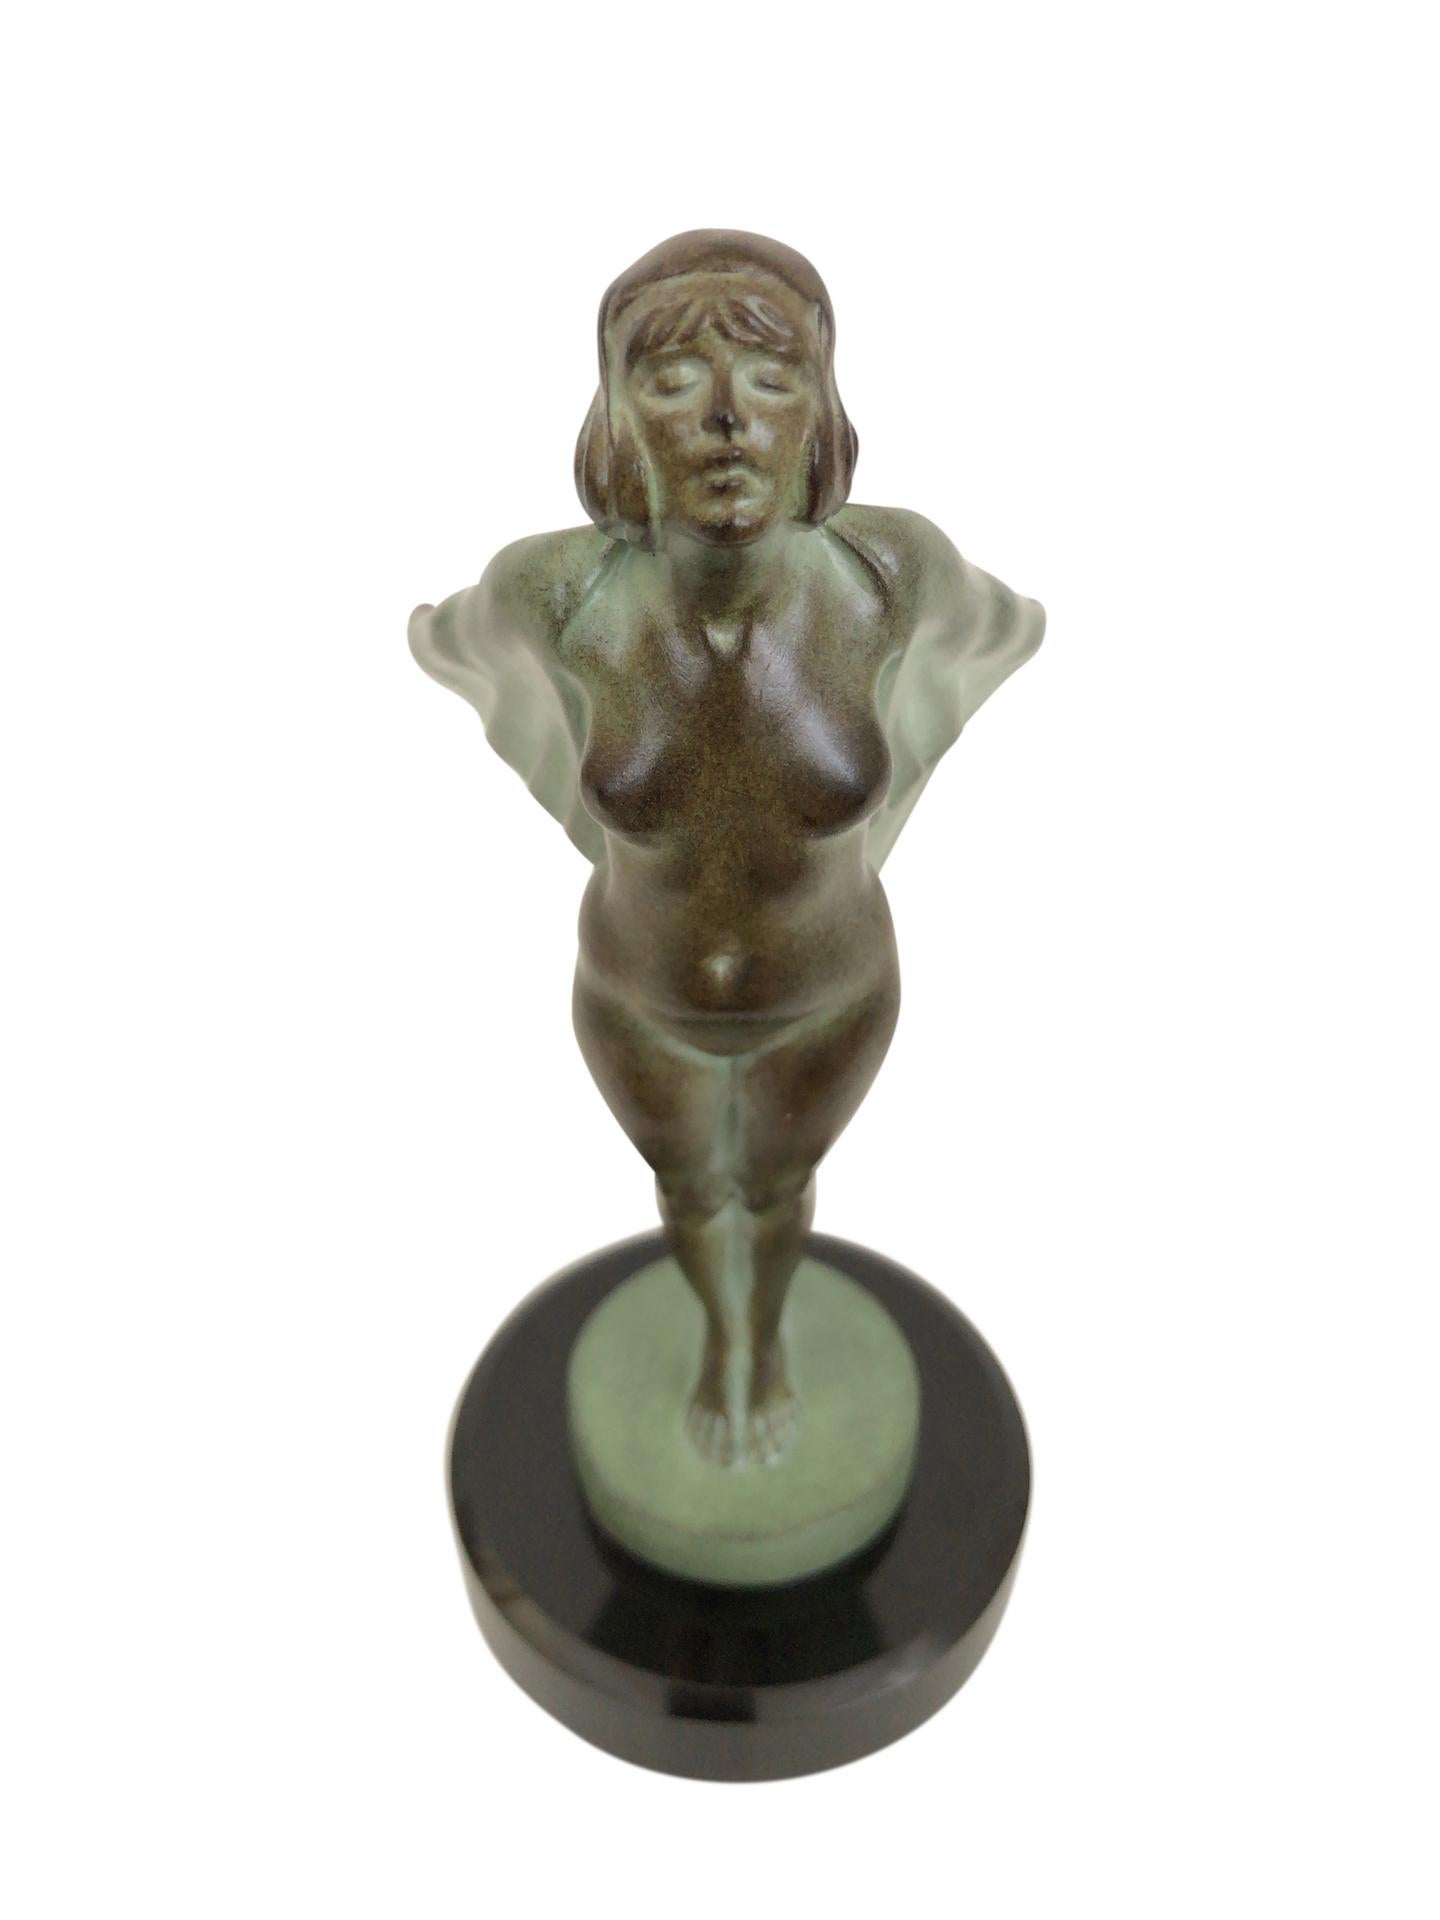 Spelter Radiator Mascot Lady at Sail Original Max Le Verrier French Art Deco Sculpture